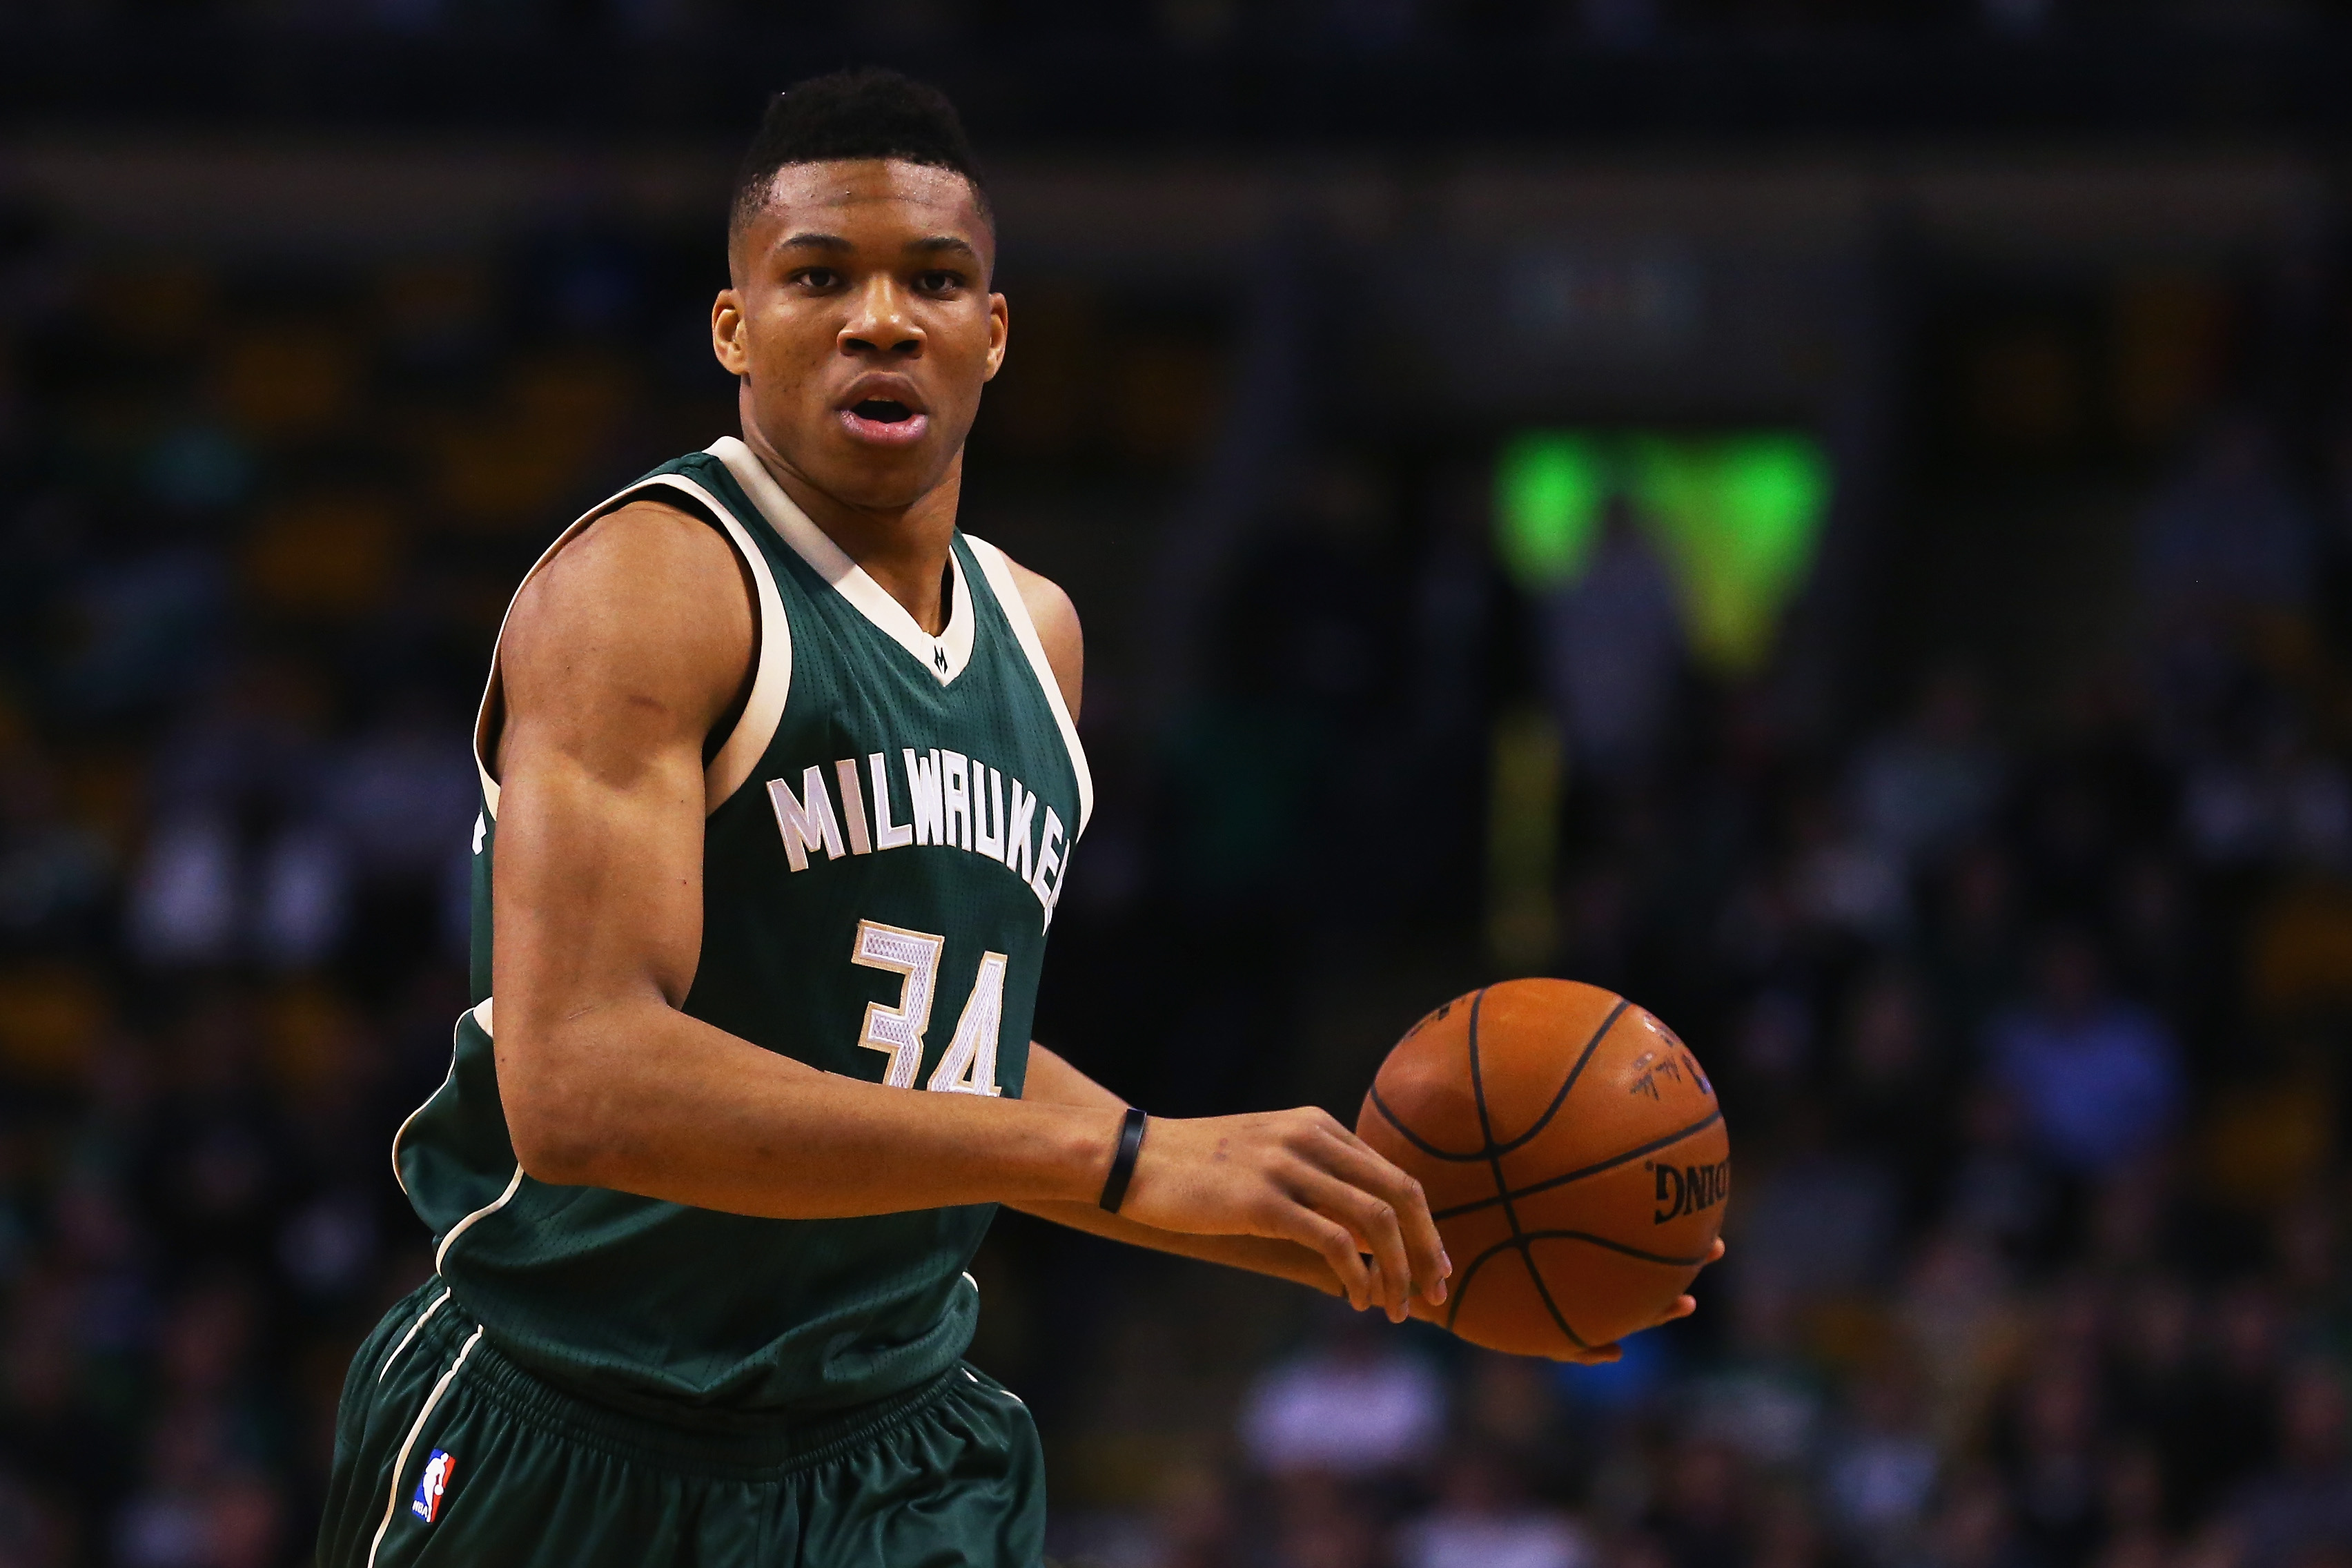 BOSTON, MA - FEBRUARY 25: Giannis Antetokounmpo #34 of the Milwaukee Bucks carries the ball against the Boston Celtics during the first quarter at TD Garden on February 25, 2016 in Boston, Massachusetts.   Maddie Meyer/Getty Images/AFP